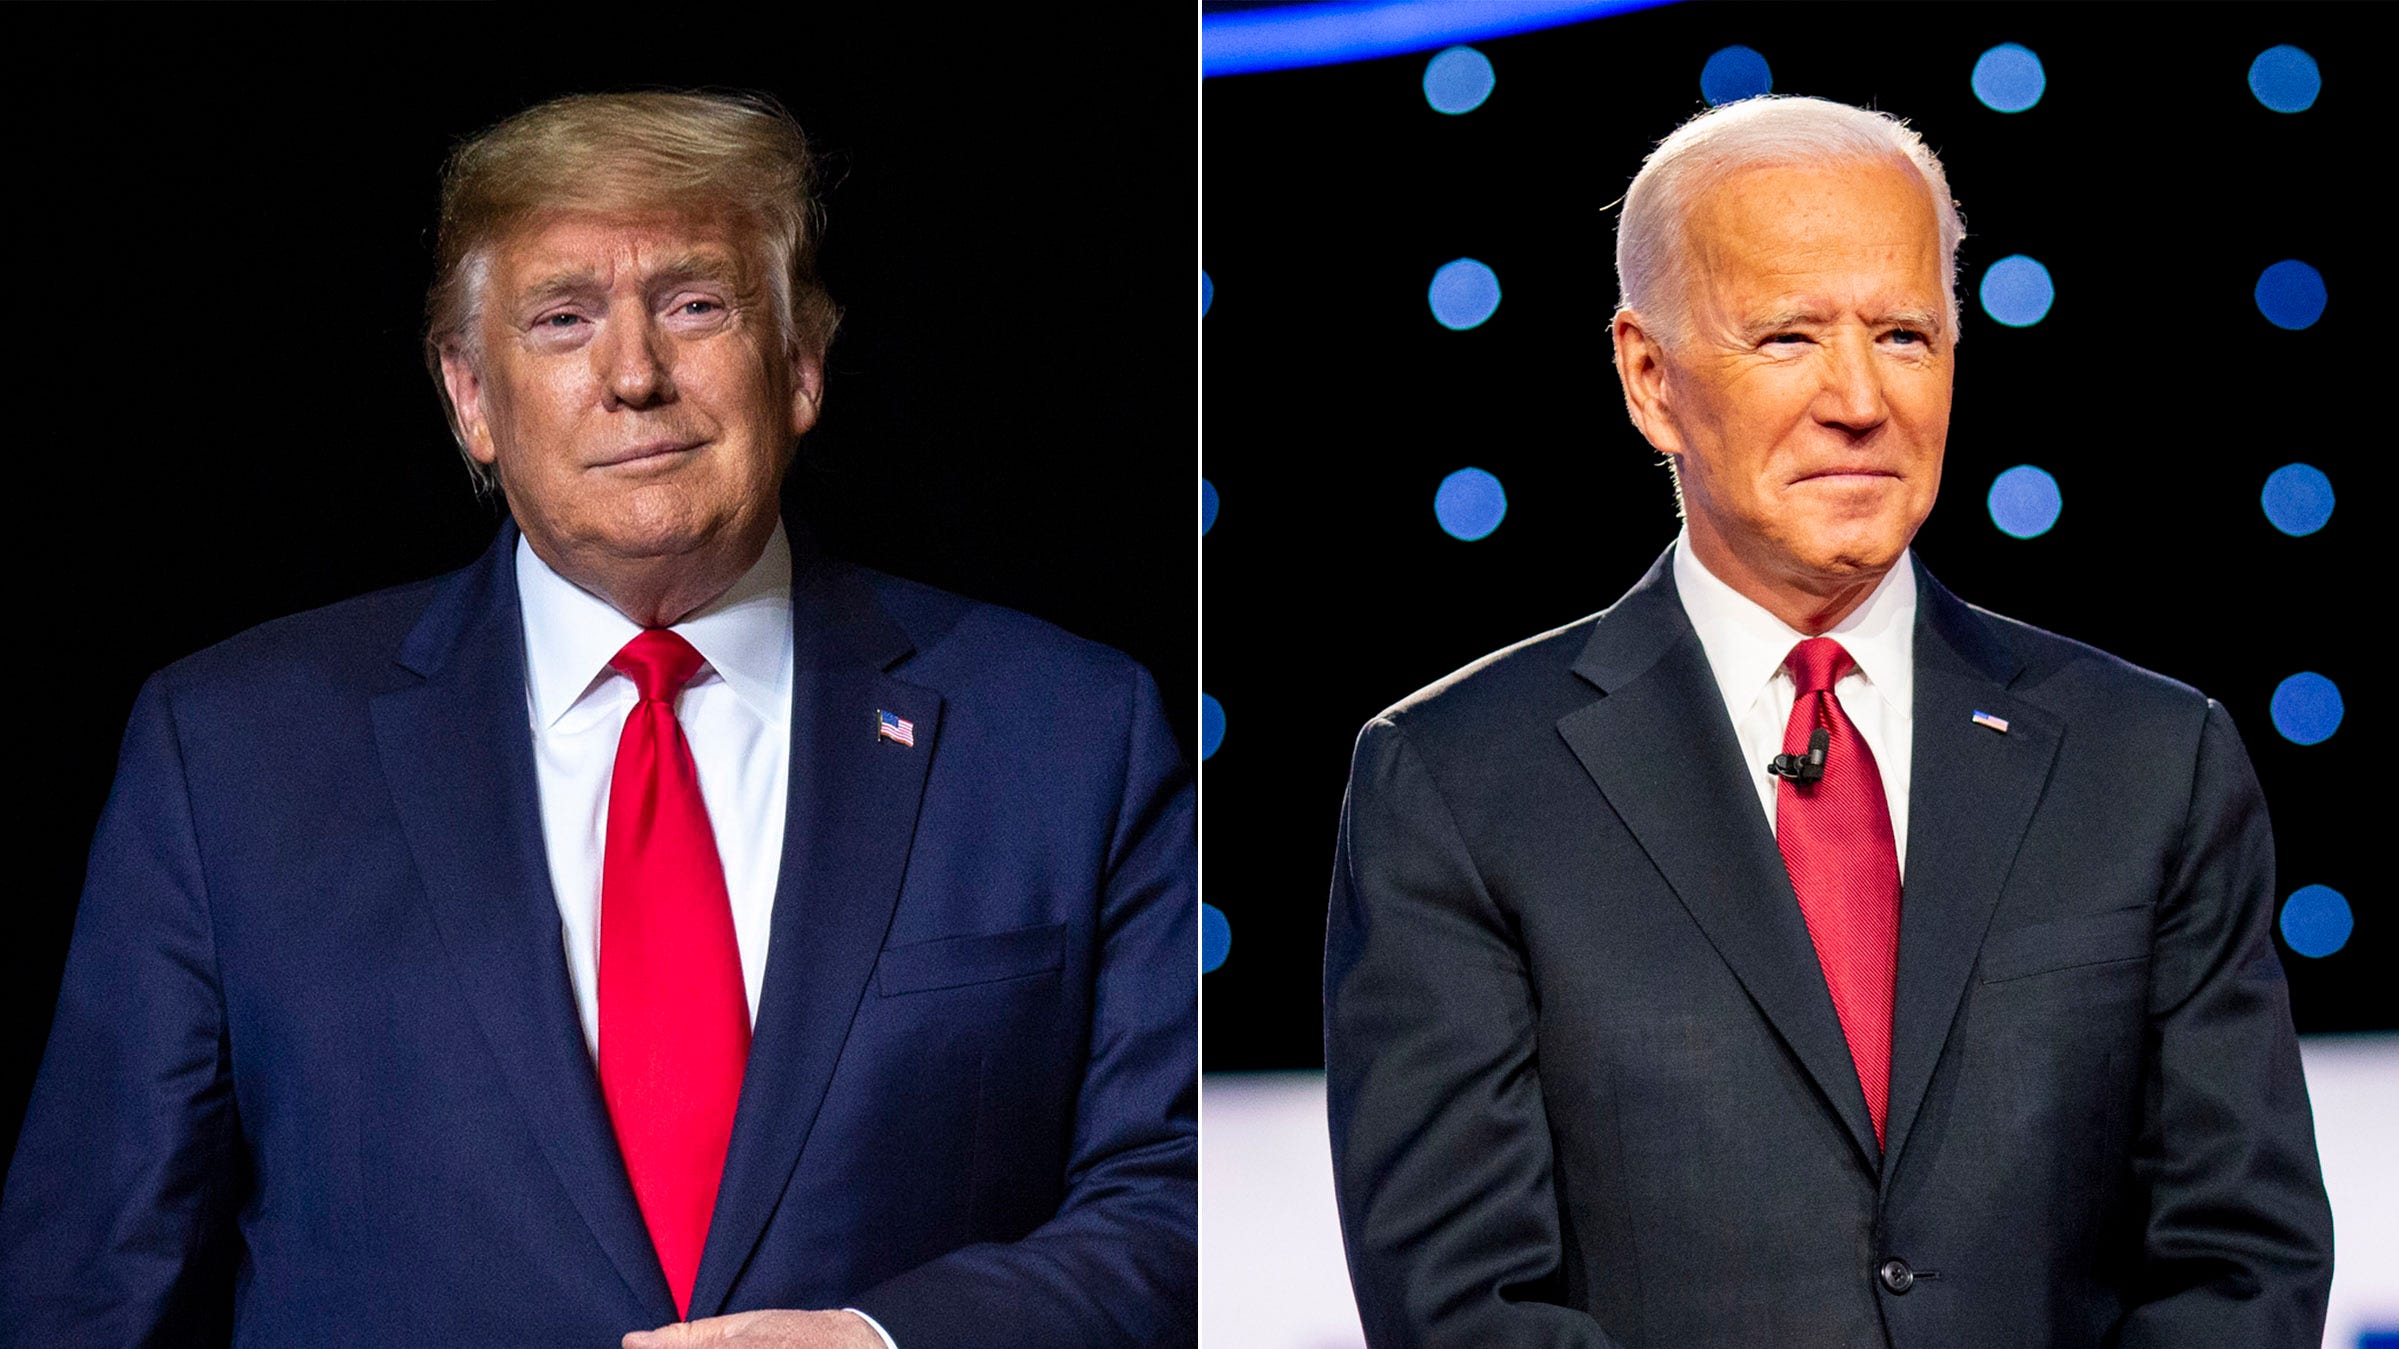 2020 election: Biden widens lead over Trump in race for White House